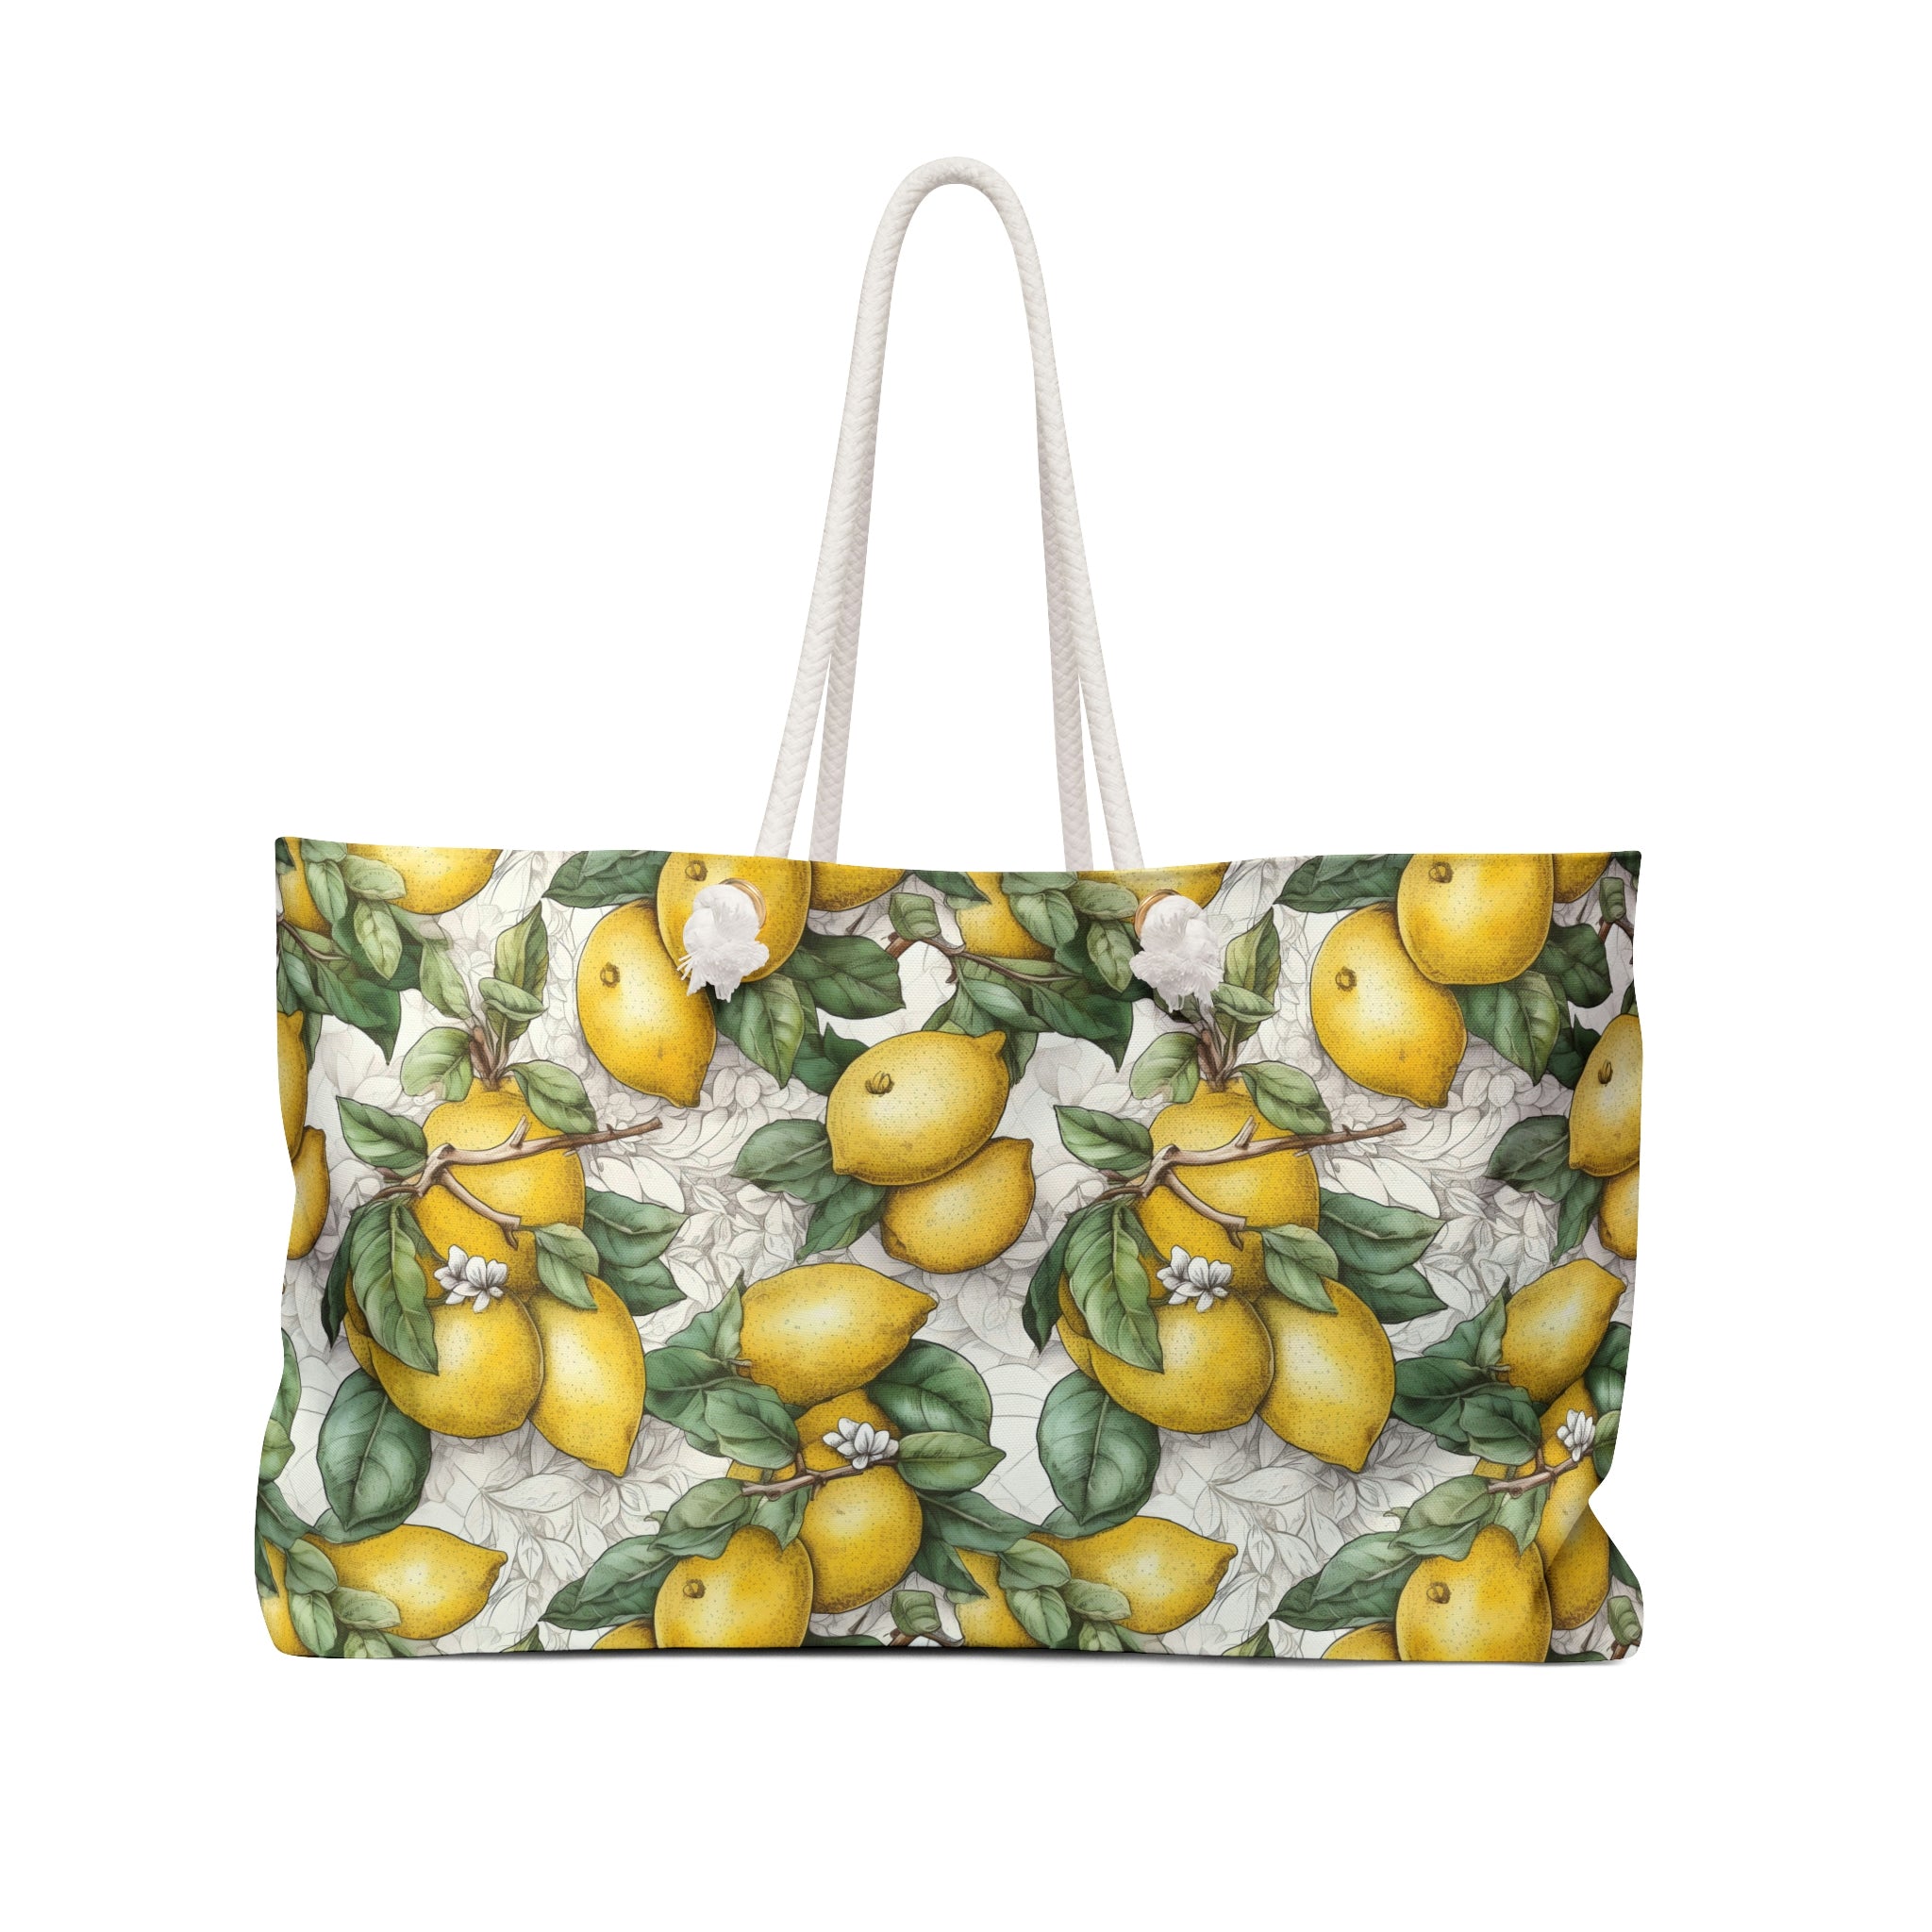 Happy Lemon CA - FREE tote bag giveaway! 💫 All you have